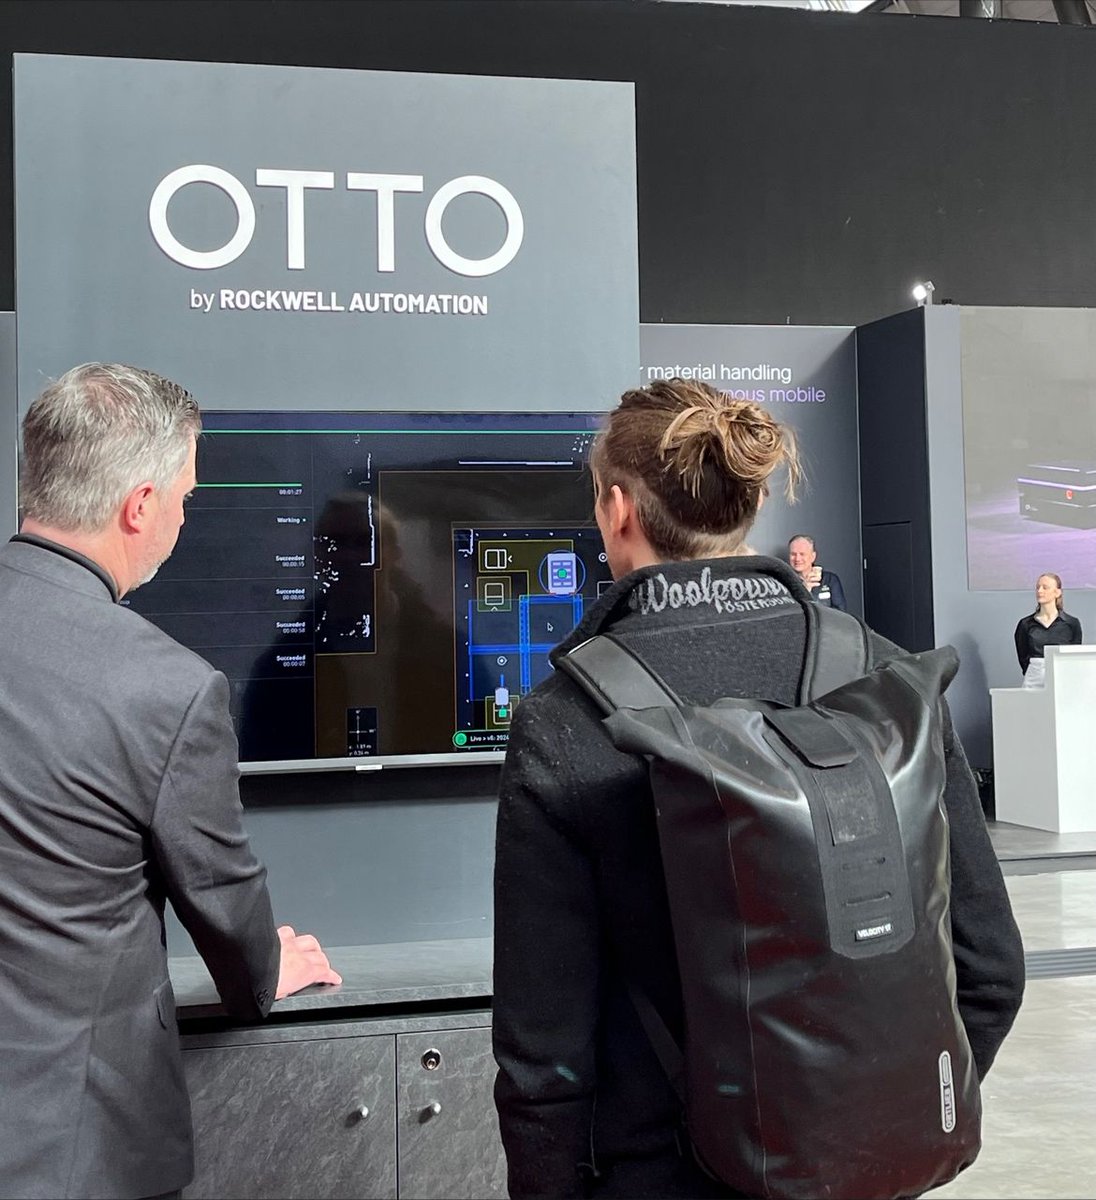 Hallo Stuttgart! The OTTO team is live at LogiMAT 2024. Stop by the booth in Halle 6 for a live demo, interact with our fleet management software and chat to an automation expert to get started on your AMR journey! ottomotors.com